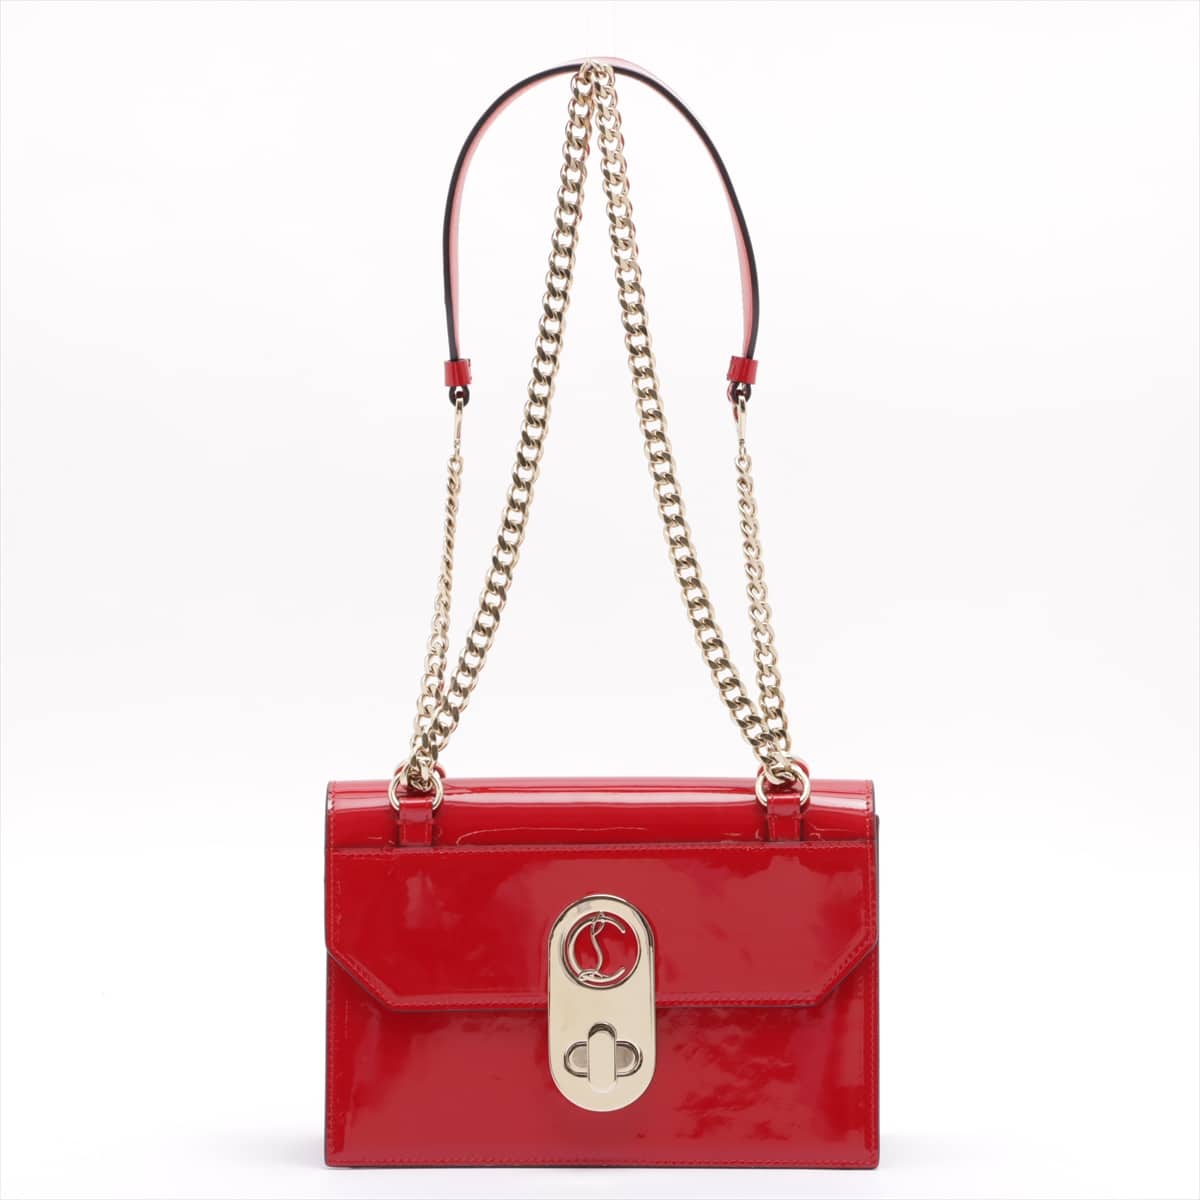 Christian Louboutin Elisa Patent leather Chain shoulder bag Red